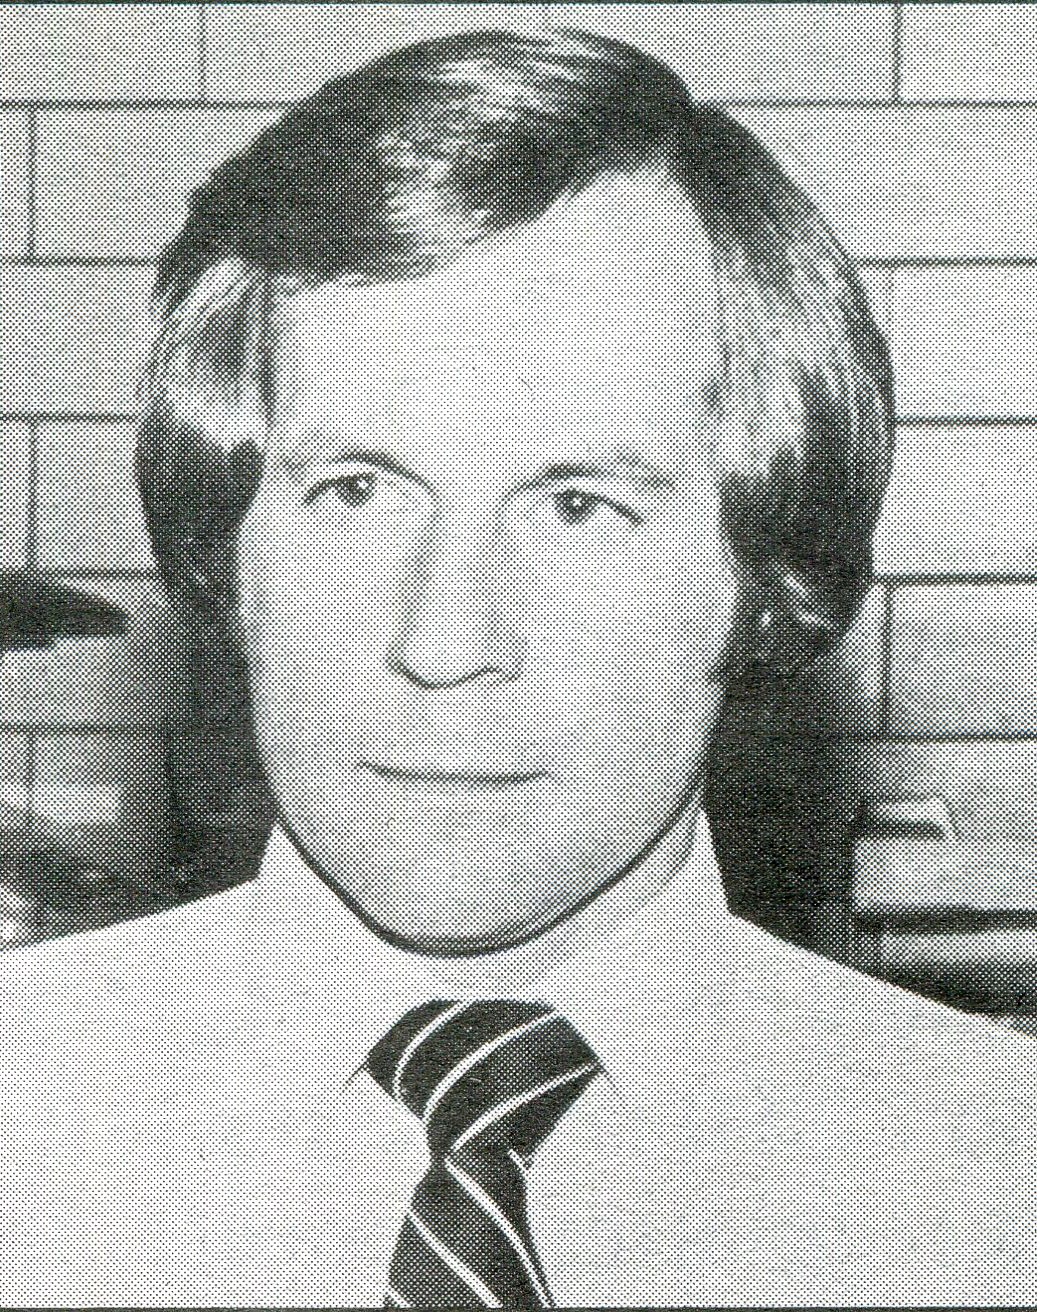 a black and white headshot of a man in a shirt and tie against a tile wall